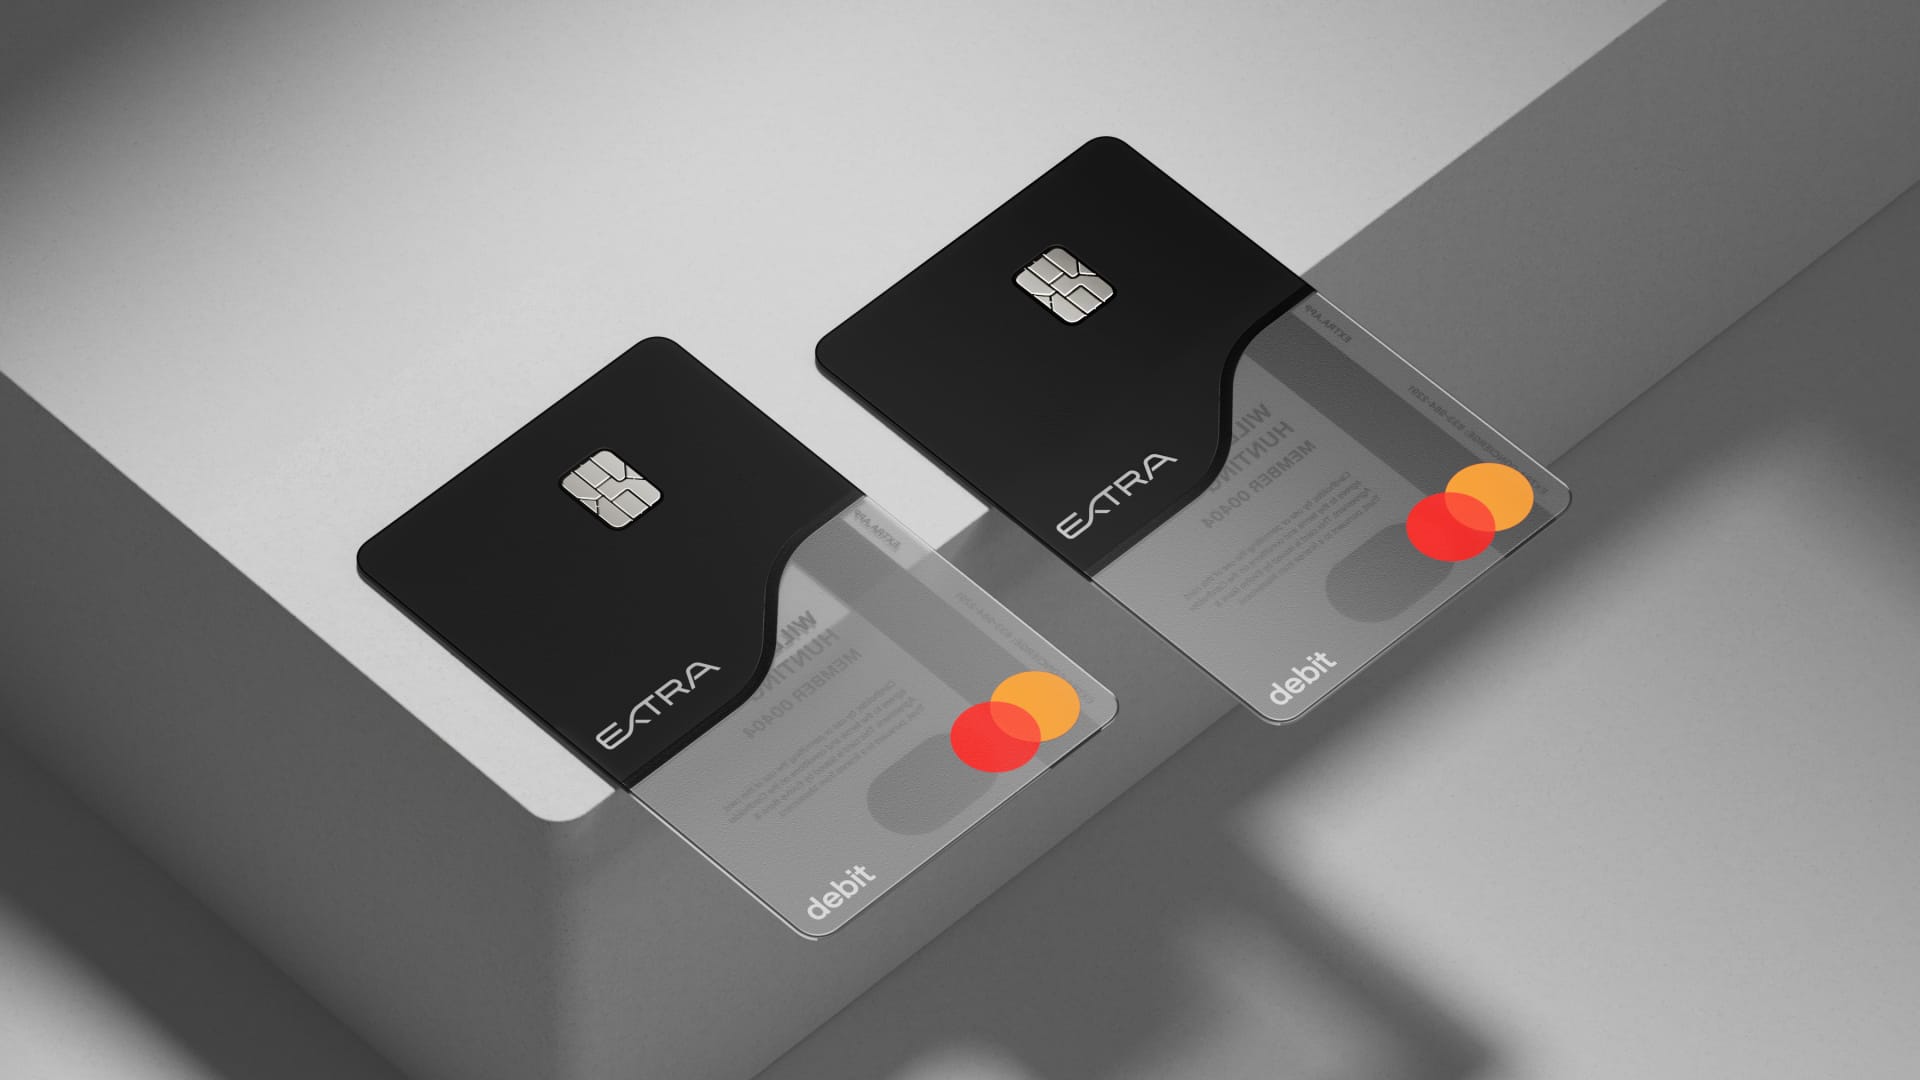 Extra Card Review: Improve Your Credit With A Debit Card